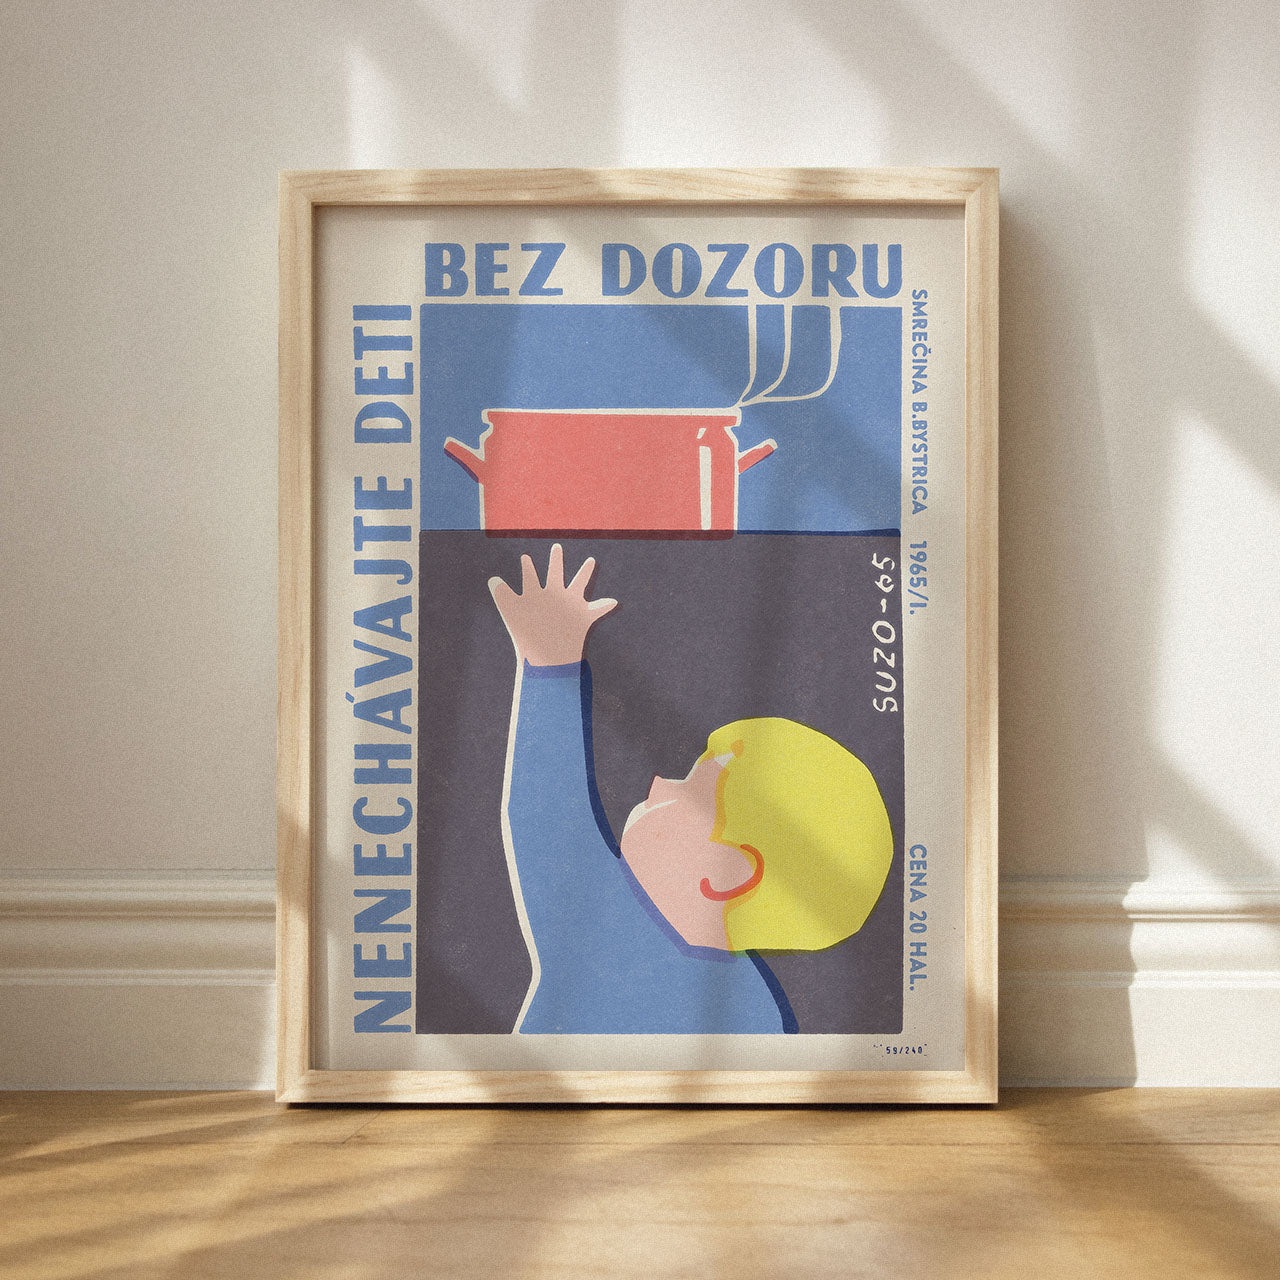 Do not leave children unattended - Poster 30x40 cm 